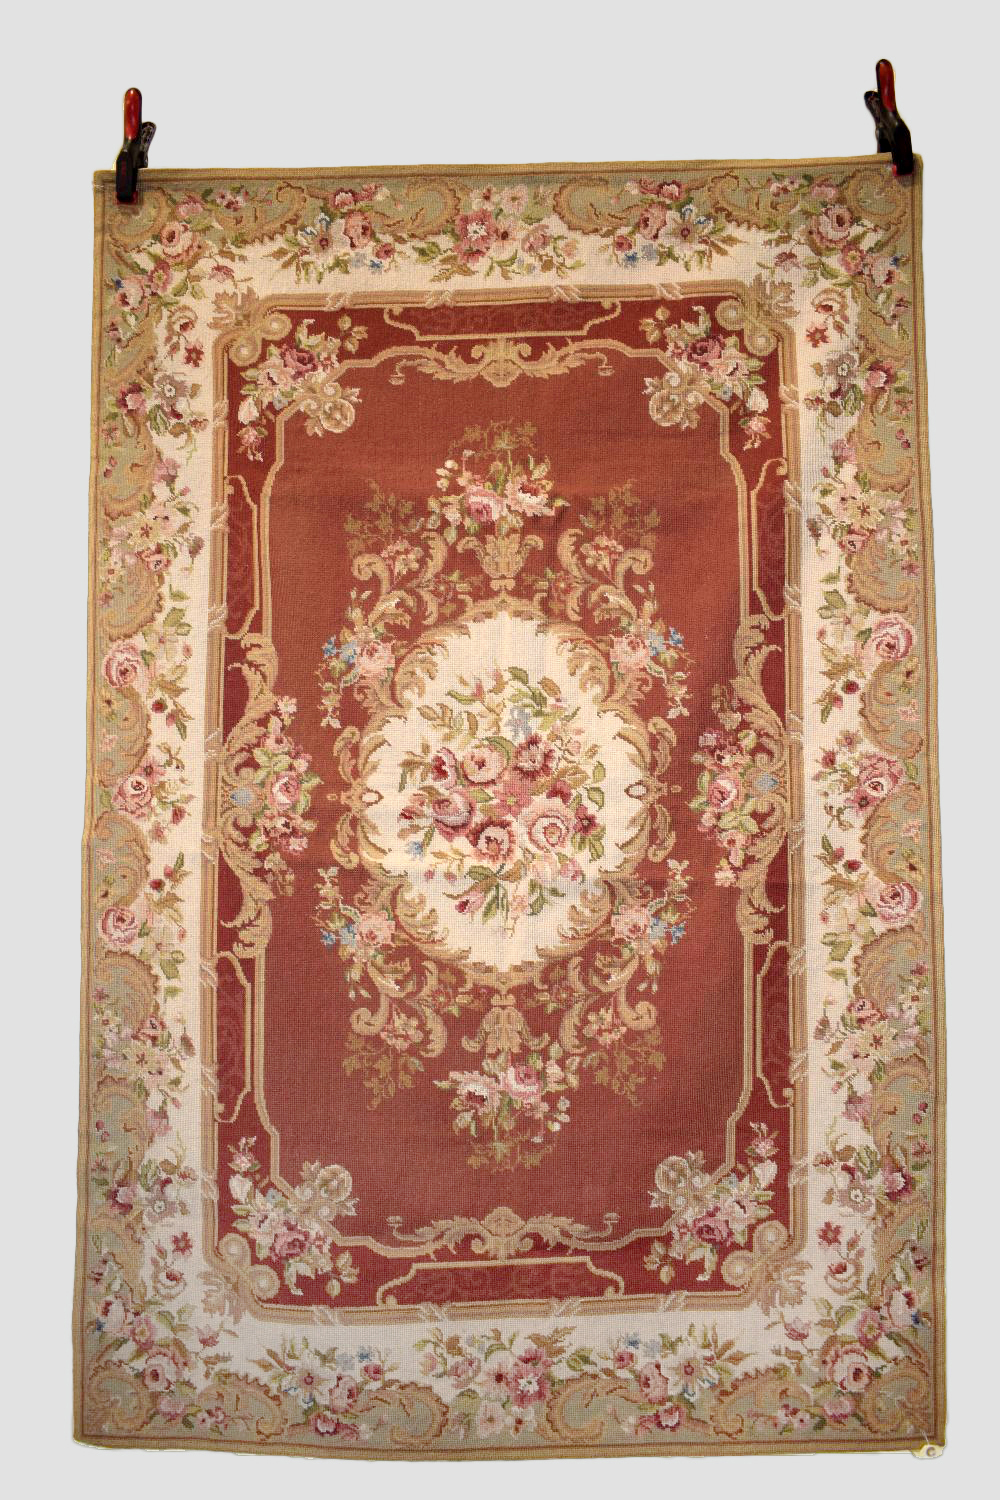 Two Chinese needlework rugs in Aubusson style, modern production; the first, 6ft. X 3ft. 11in. 1.